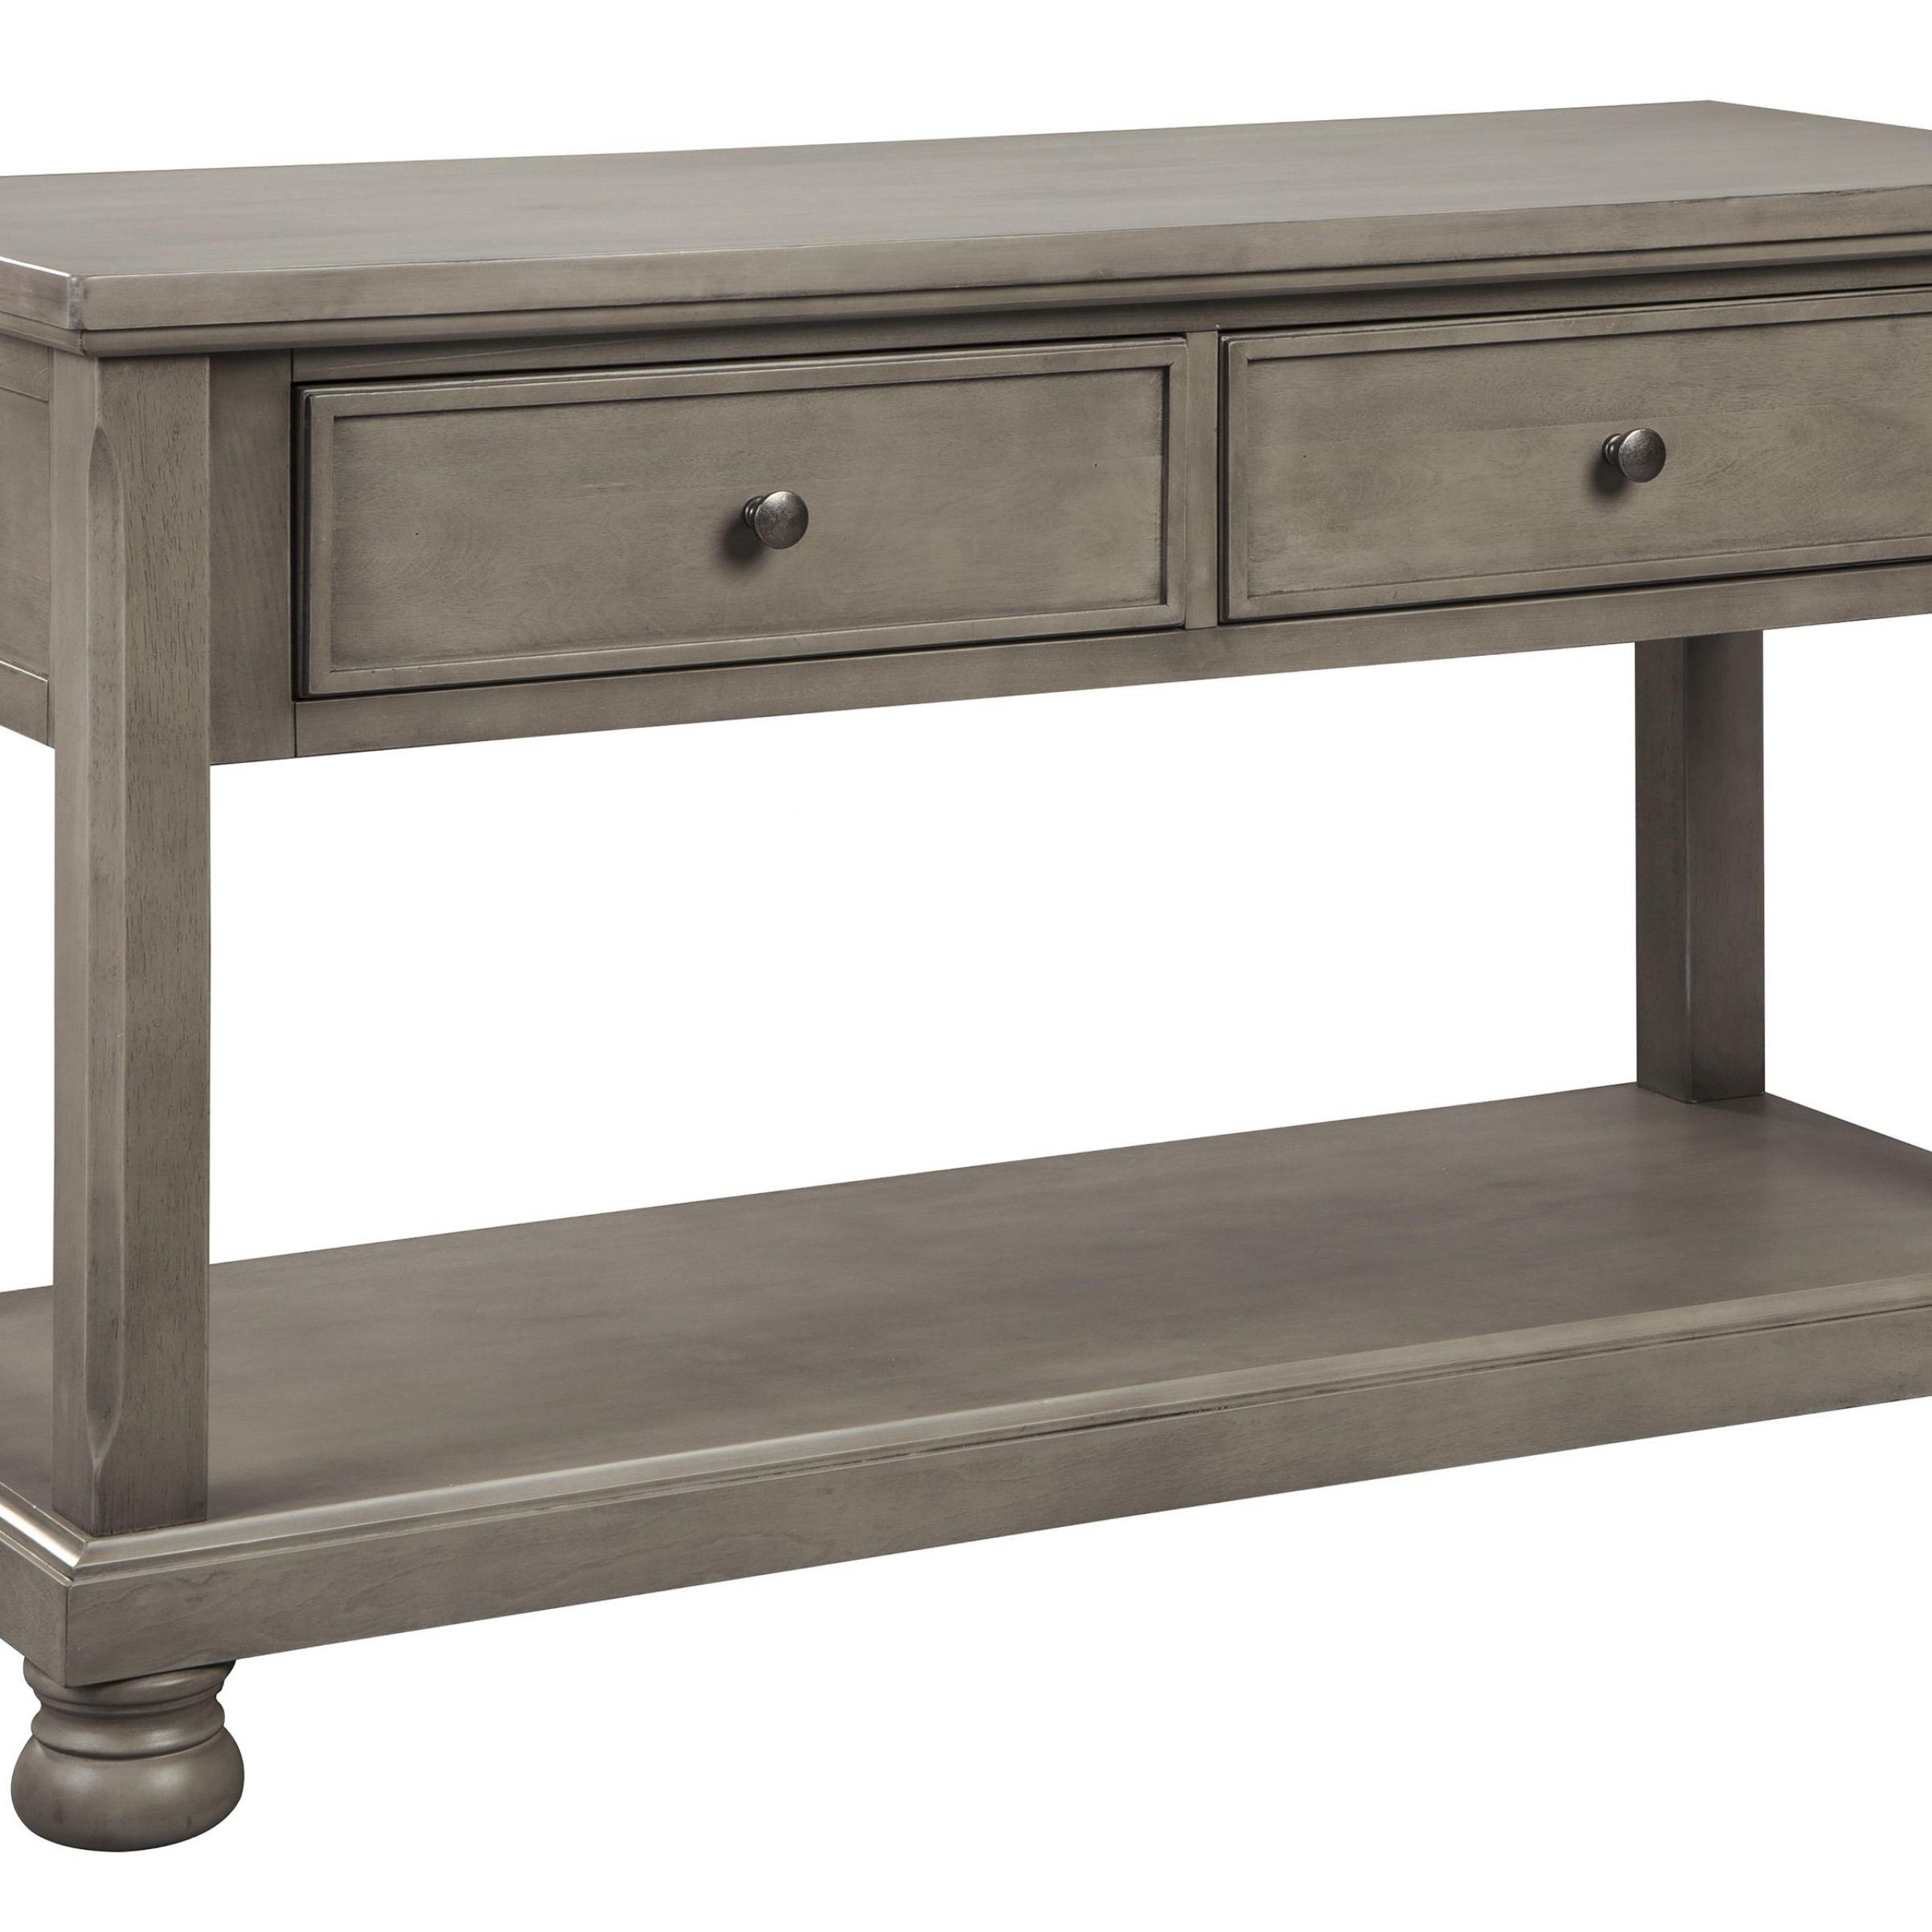 2 Drawer Wooden Console Table With Bun Feet And Open Within 2 Drawer Oval Console Tables (View 10 of 20)